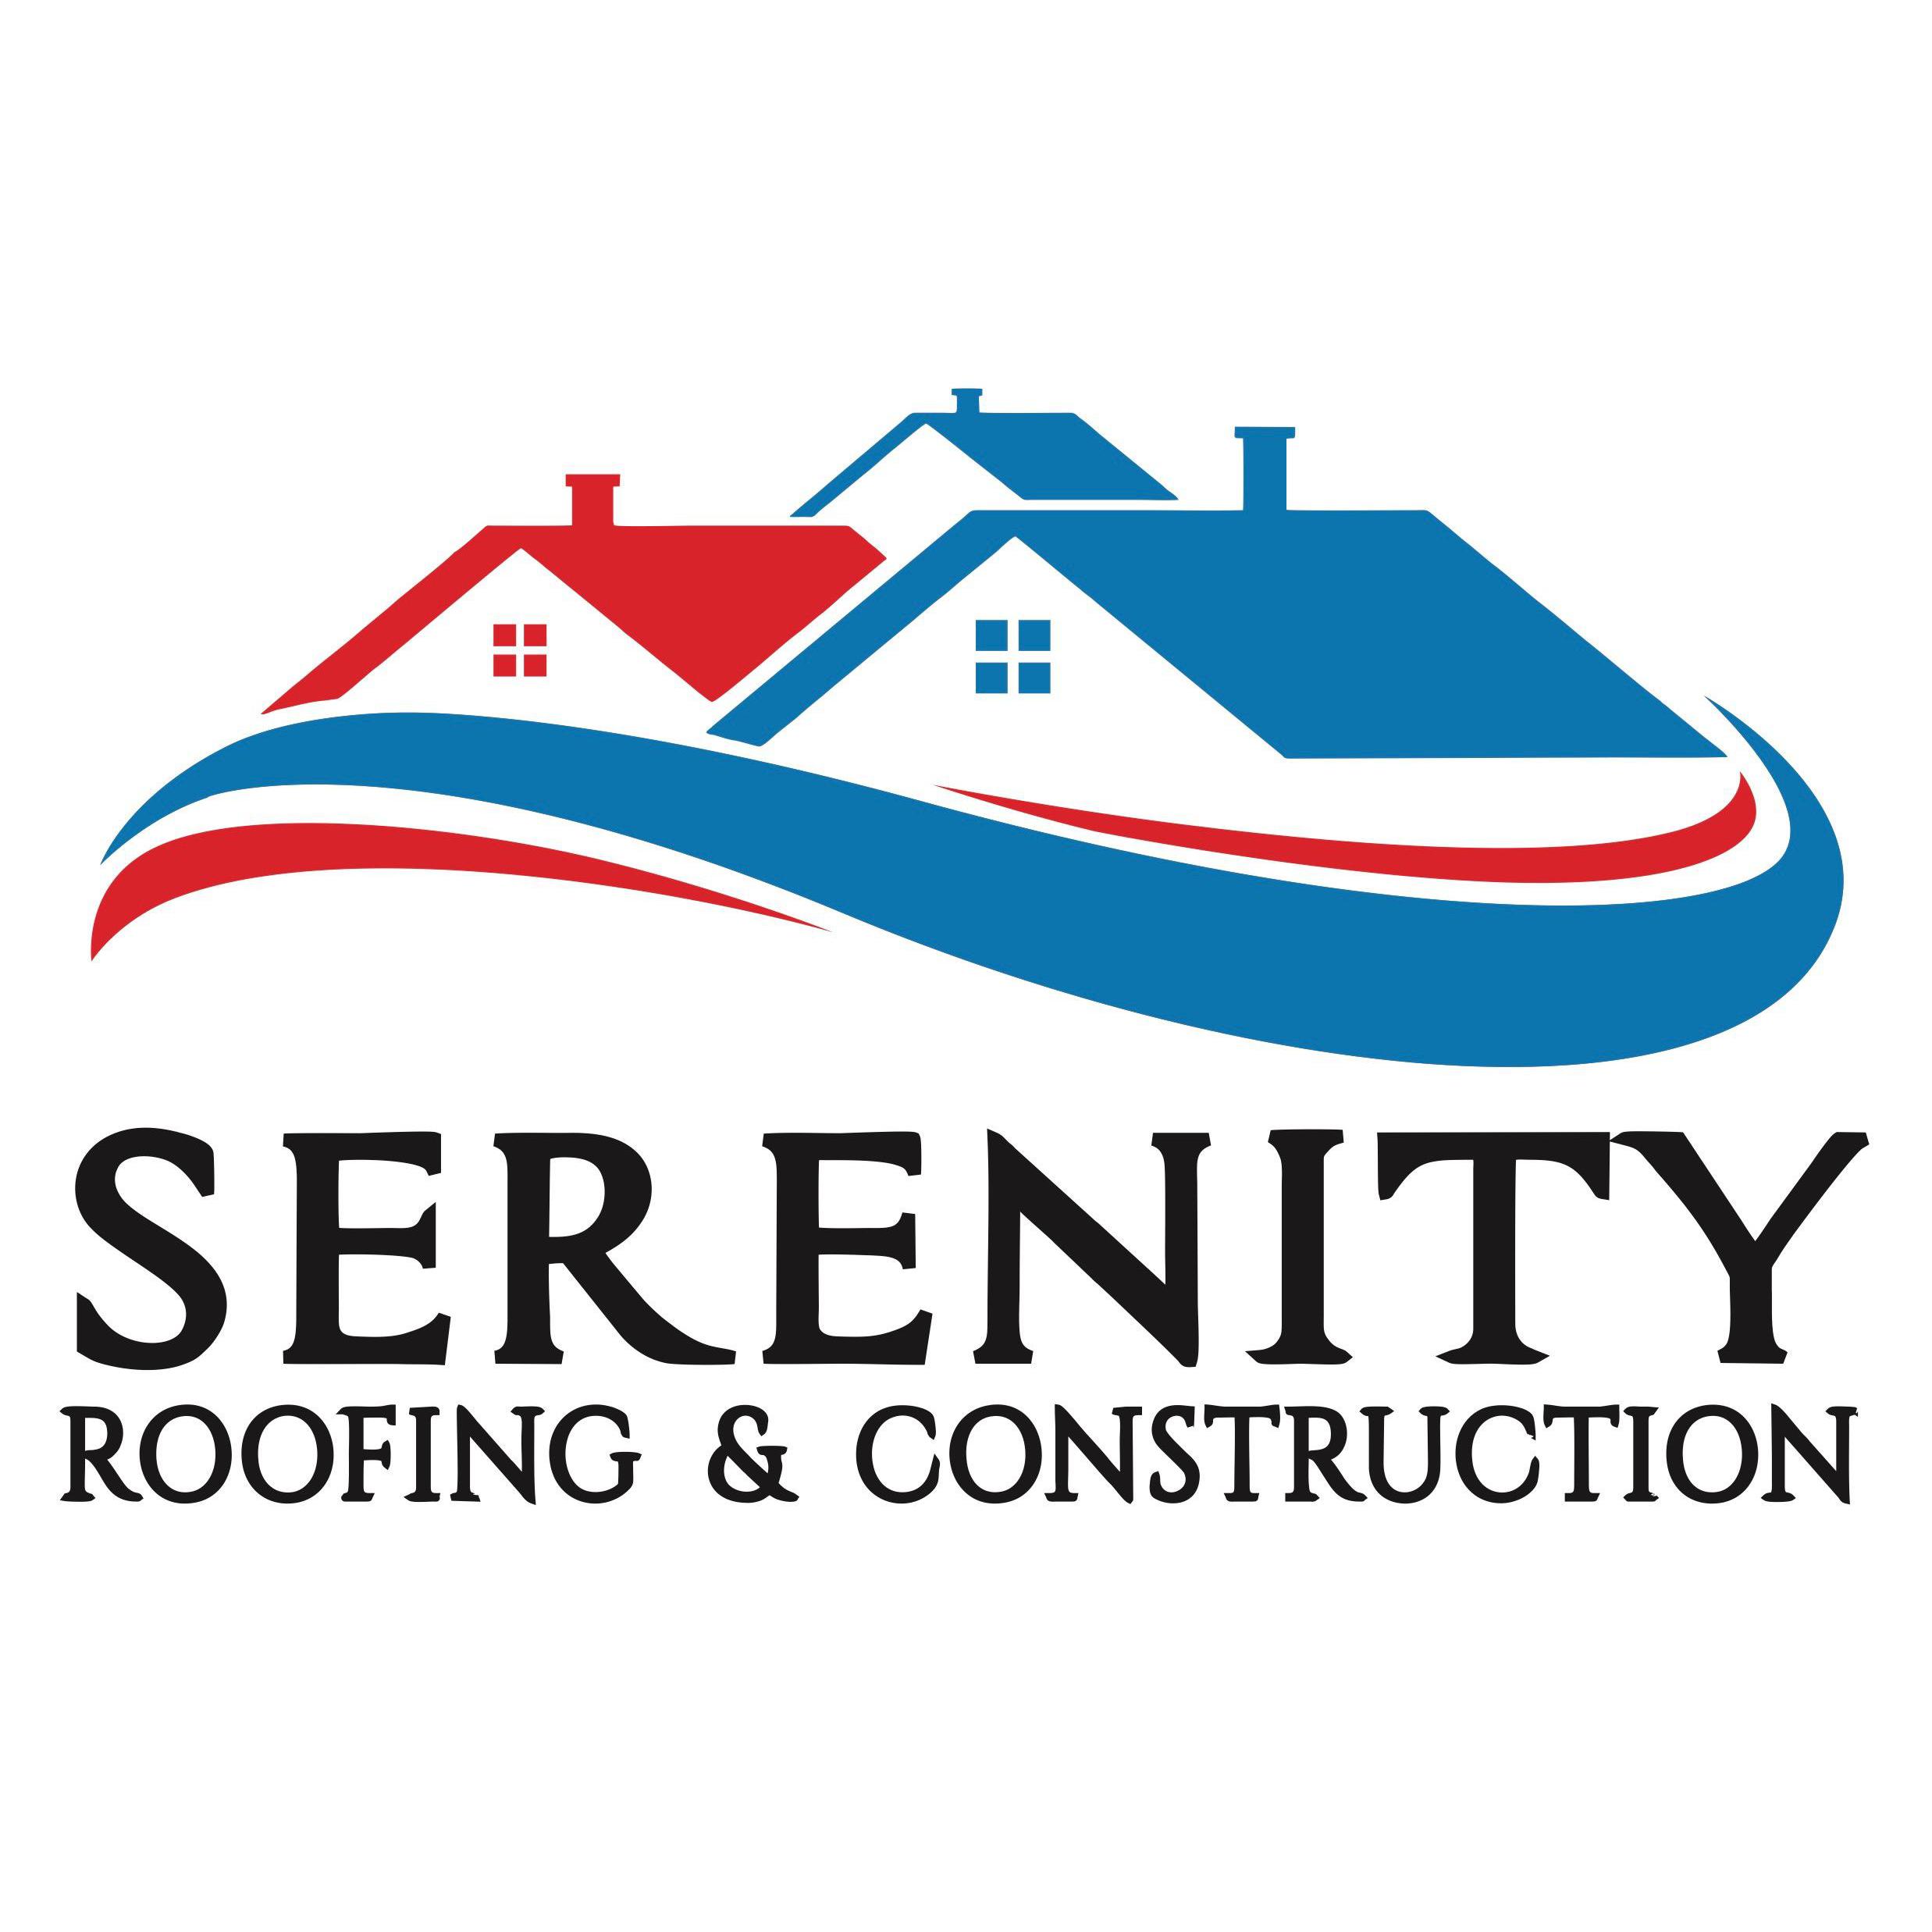 Serenity Roofing & Construction